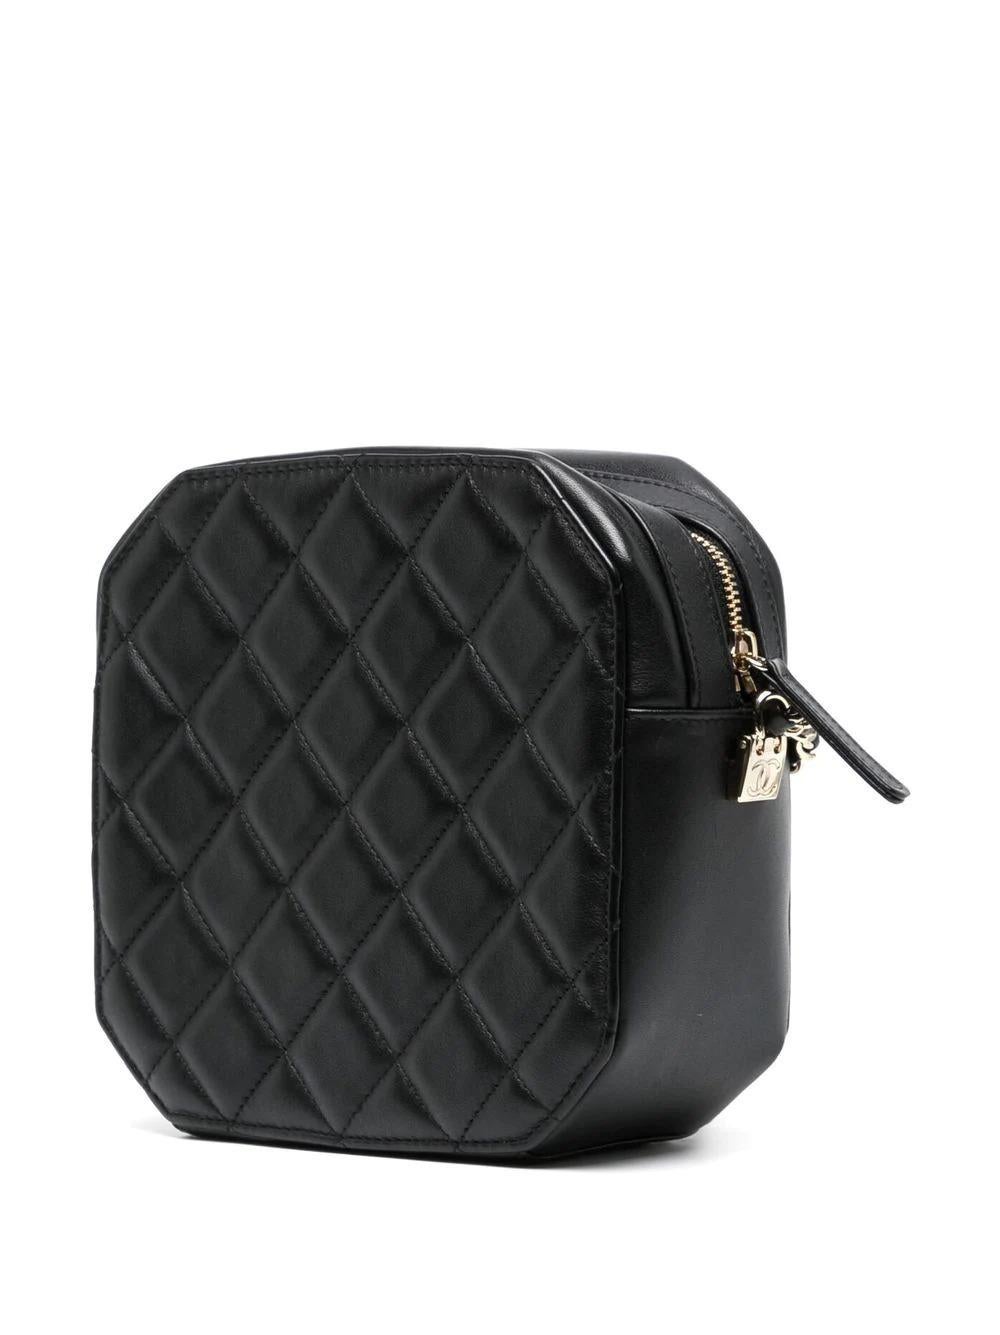 Camera bags are named for their practical, compact shape. Crafted from black lambskin, this pre-owned Chanel bag from 2021 features the brand's signature CC logo on one side and quilted detailing on the other. Wear it across the body or over your